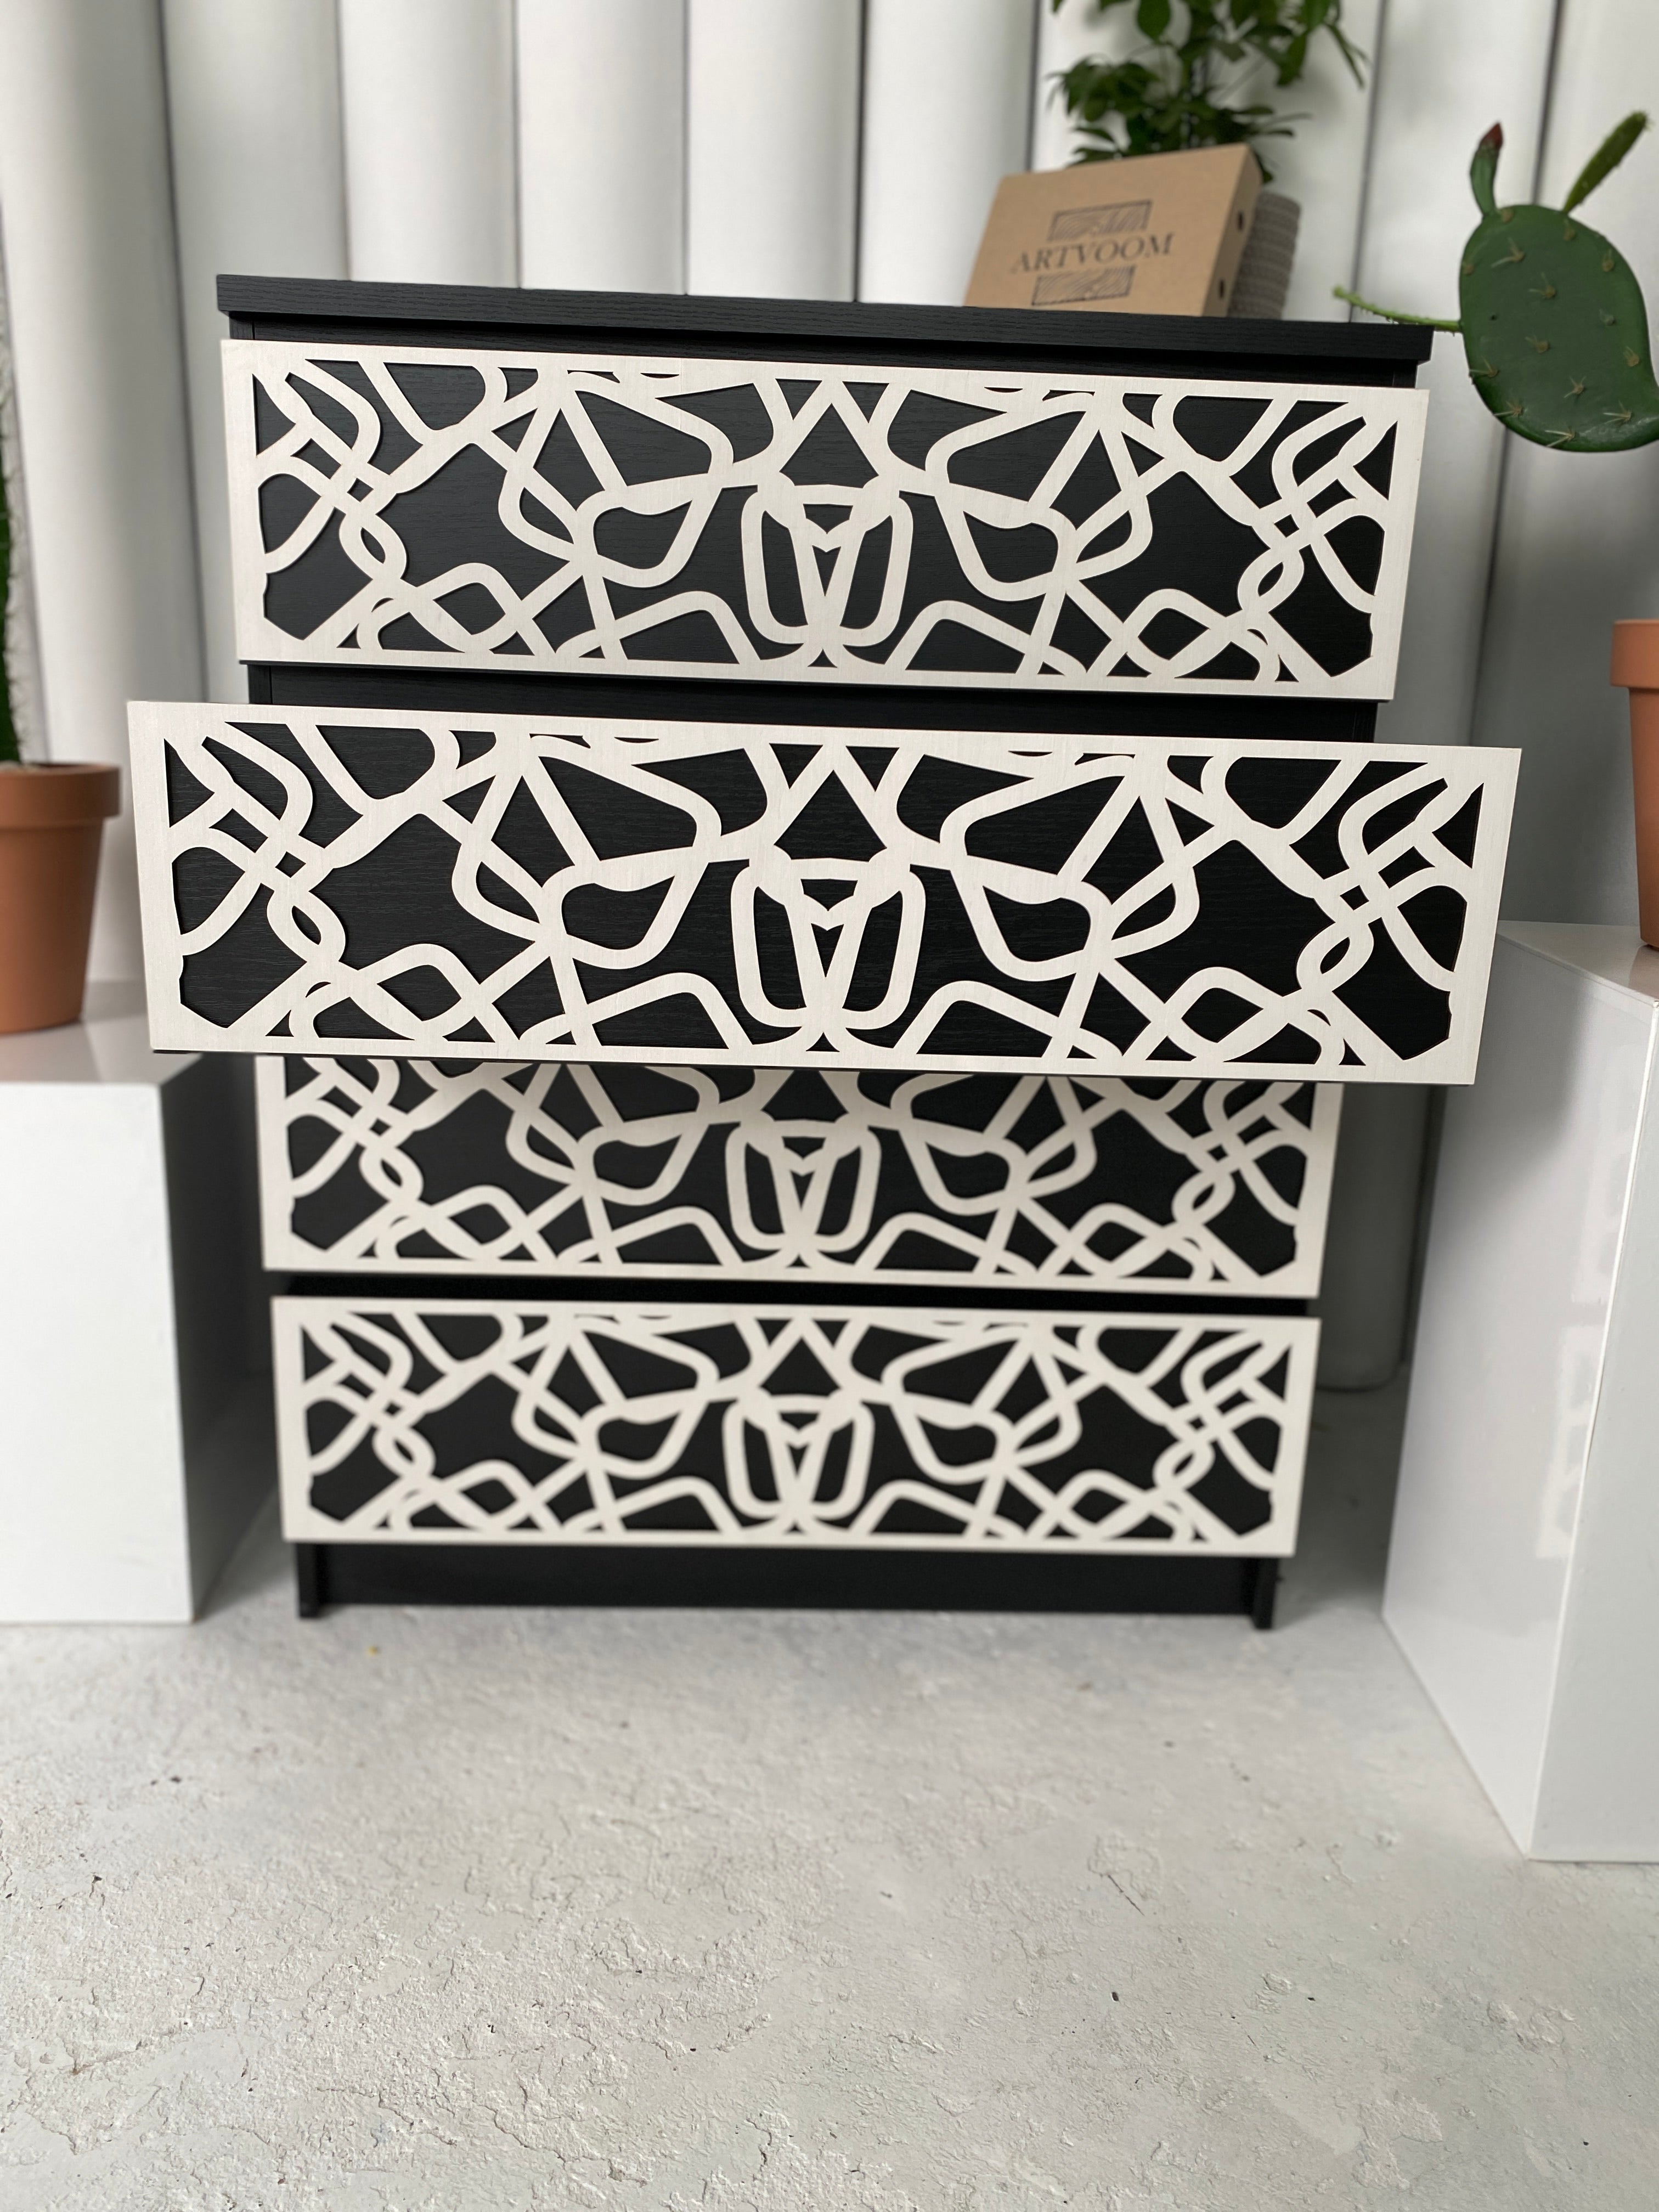 Overlay wooden panels for decorating ikea malm dresser with abstract pattern - Artvoom